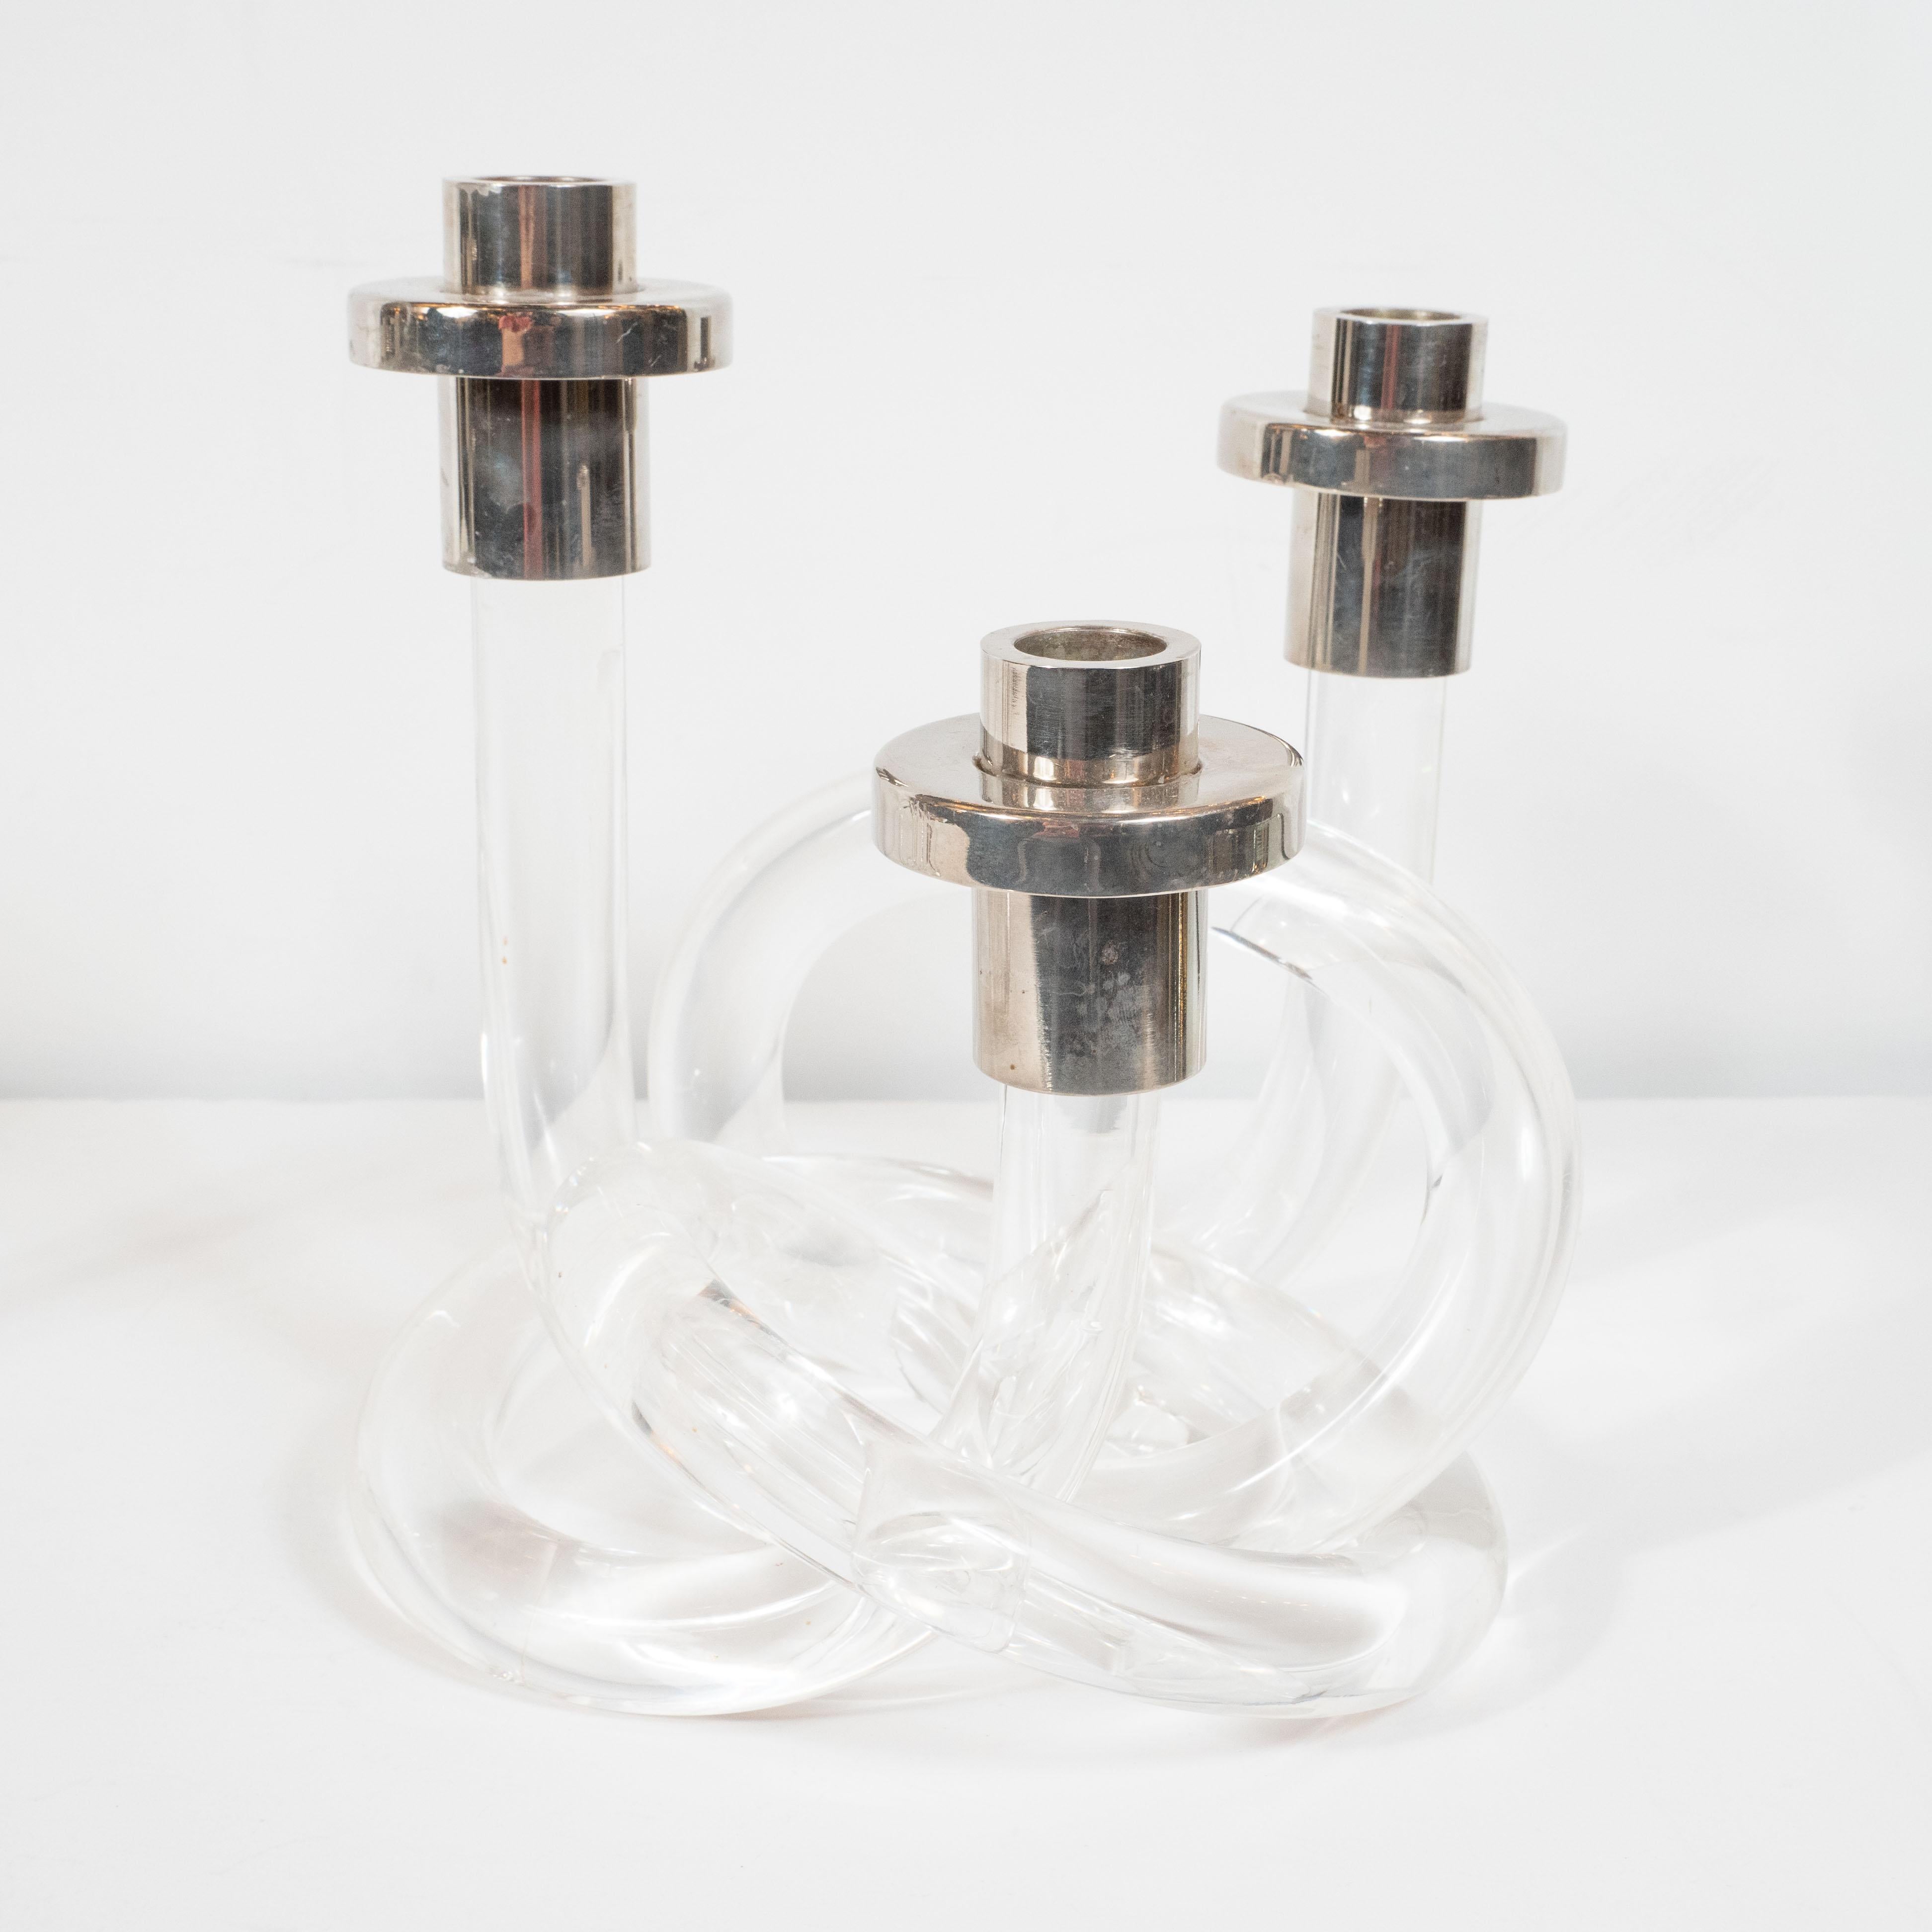 Pair of Midcentury Lucite and Nickel Candlesticks by Dorothy Thorpe 1